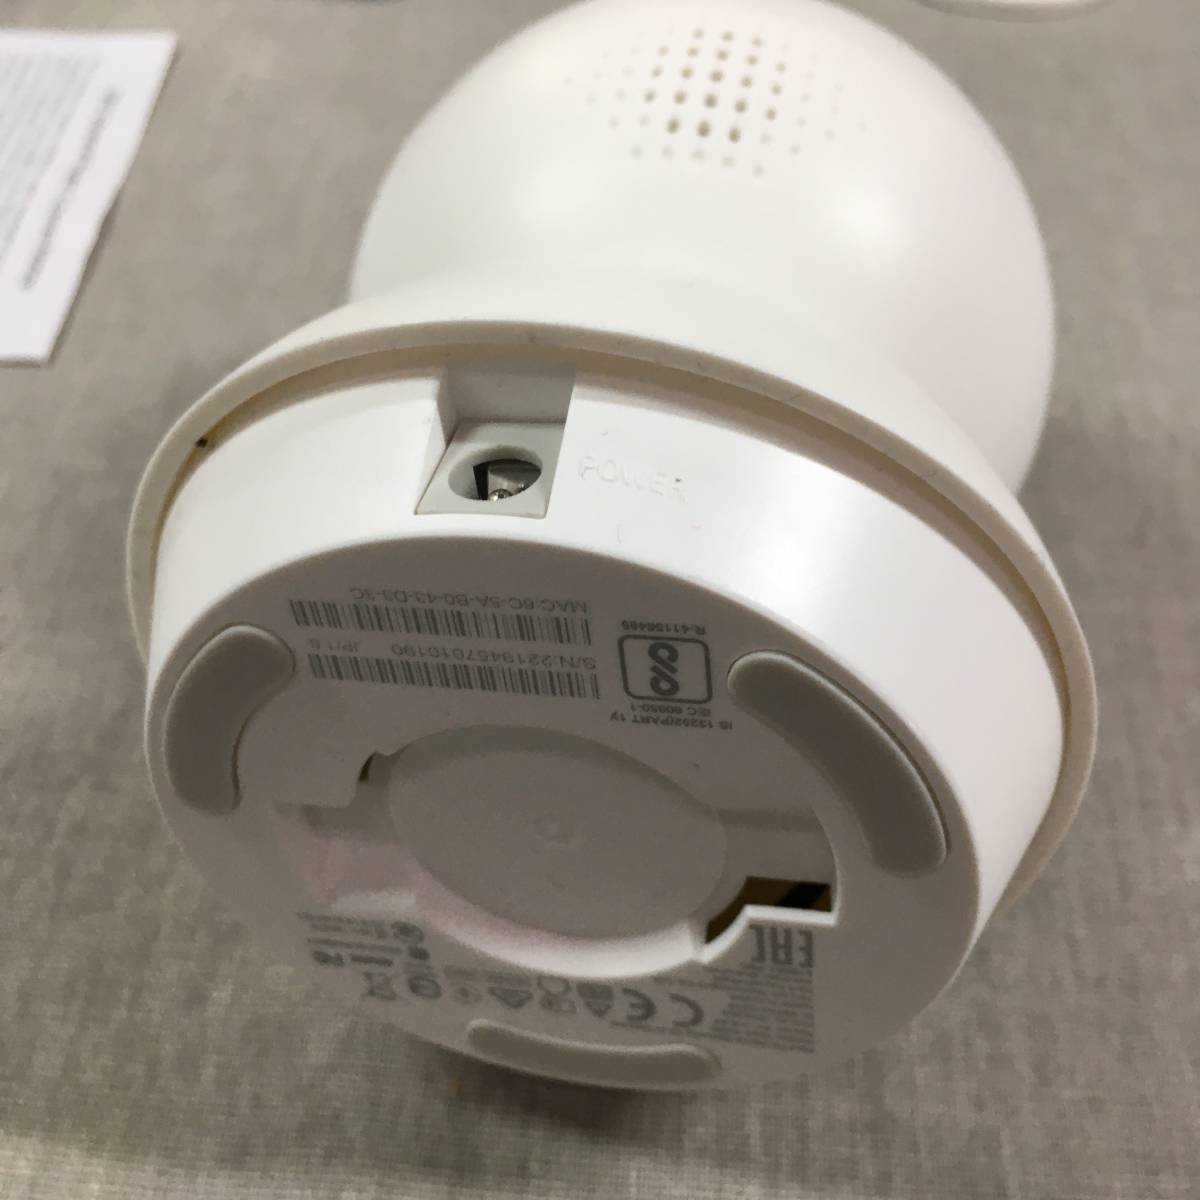  present condition goods TP-Link network Wi-Fi camera Tapo C200